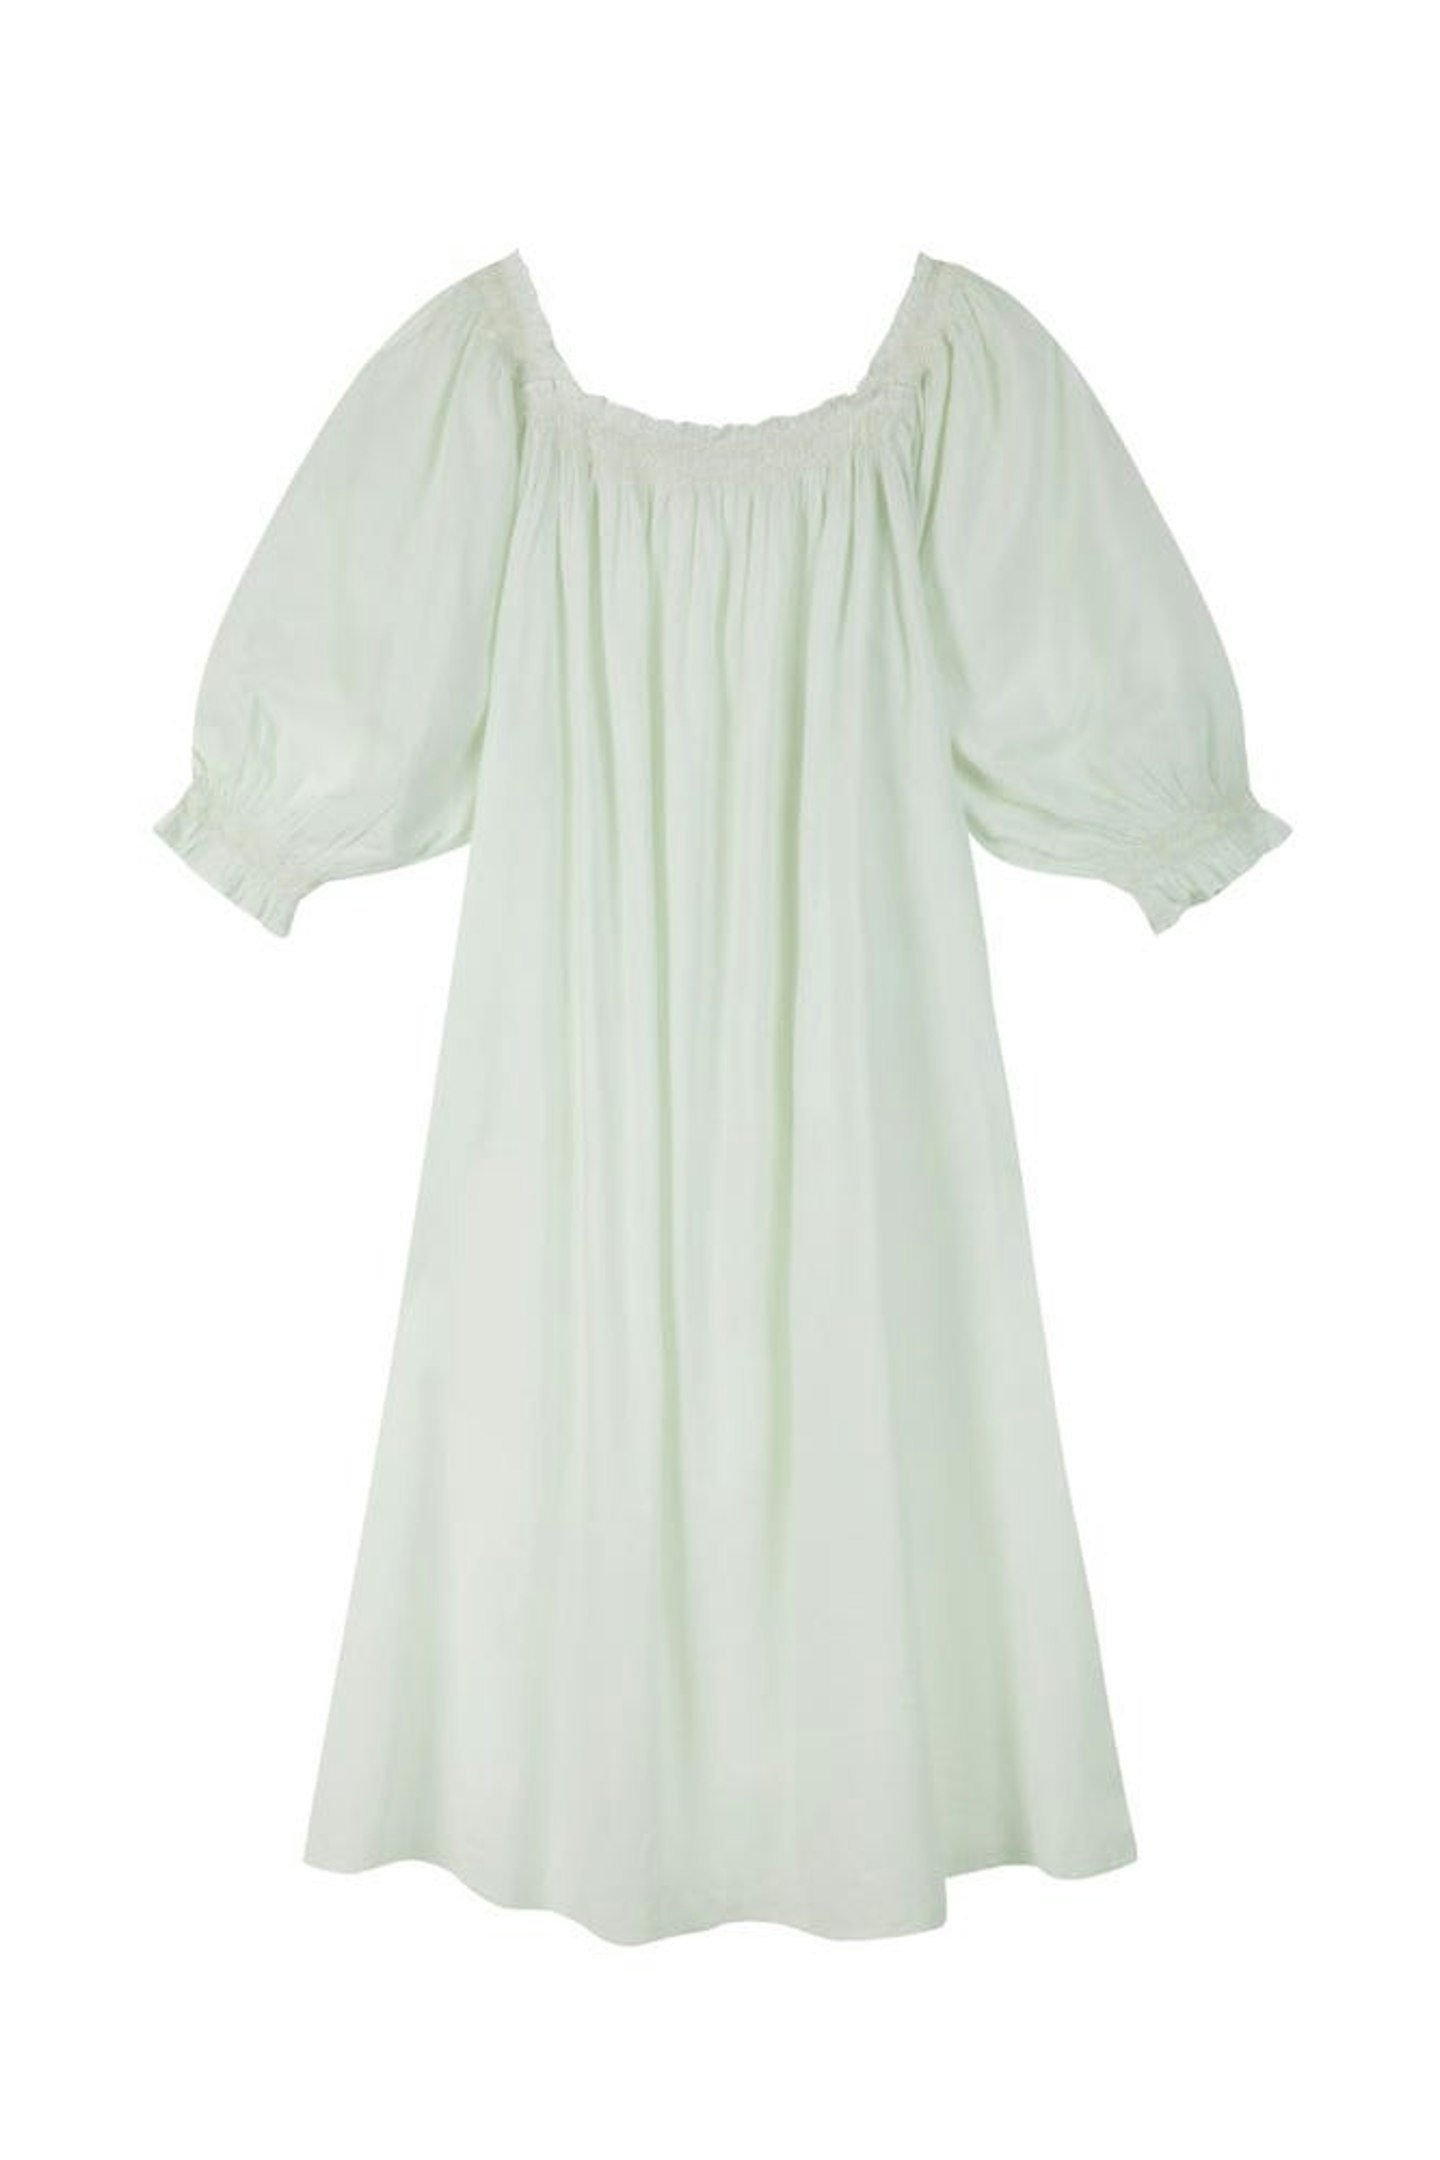 if only if nightdress